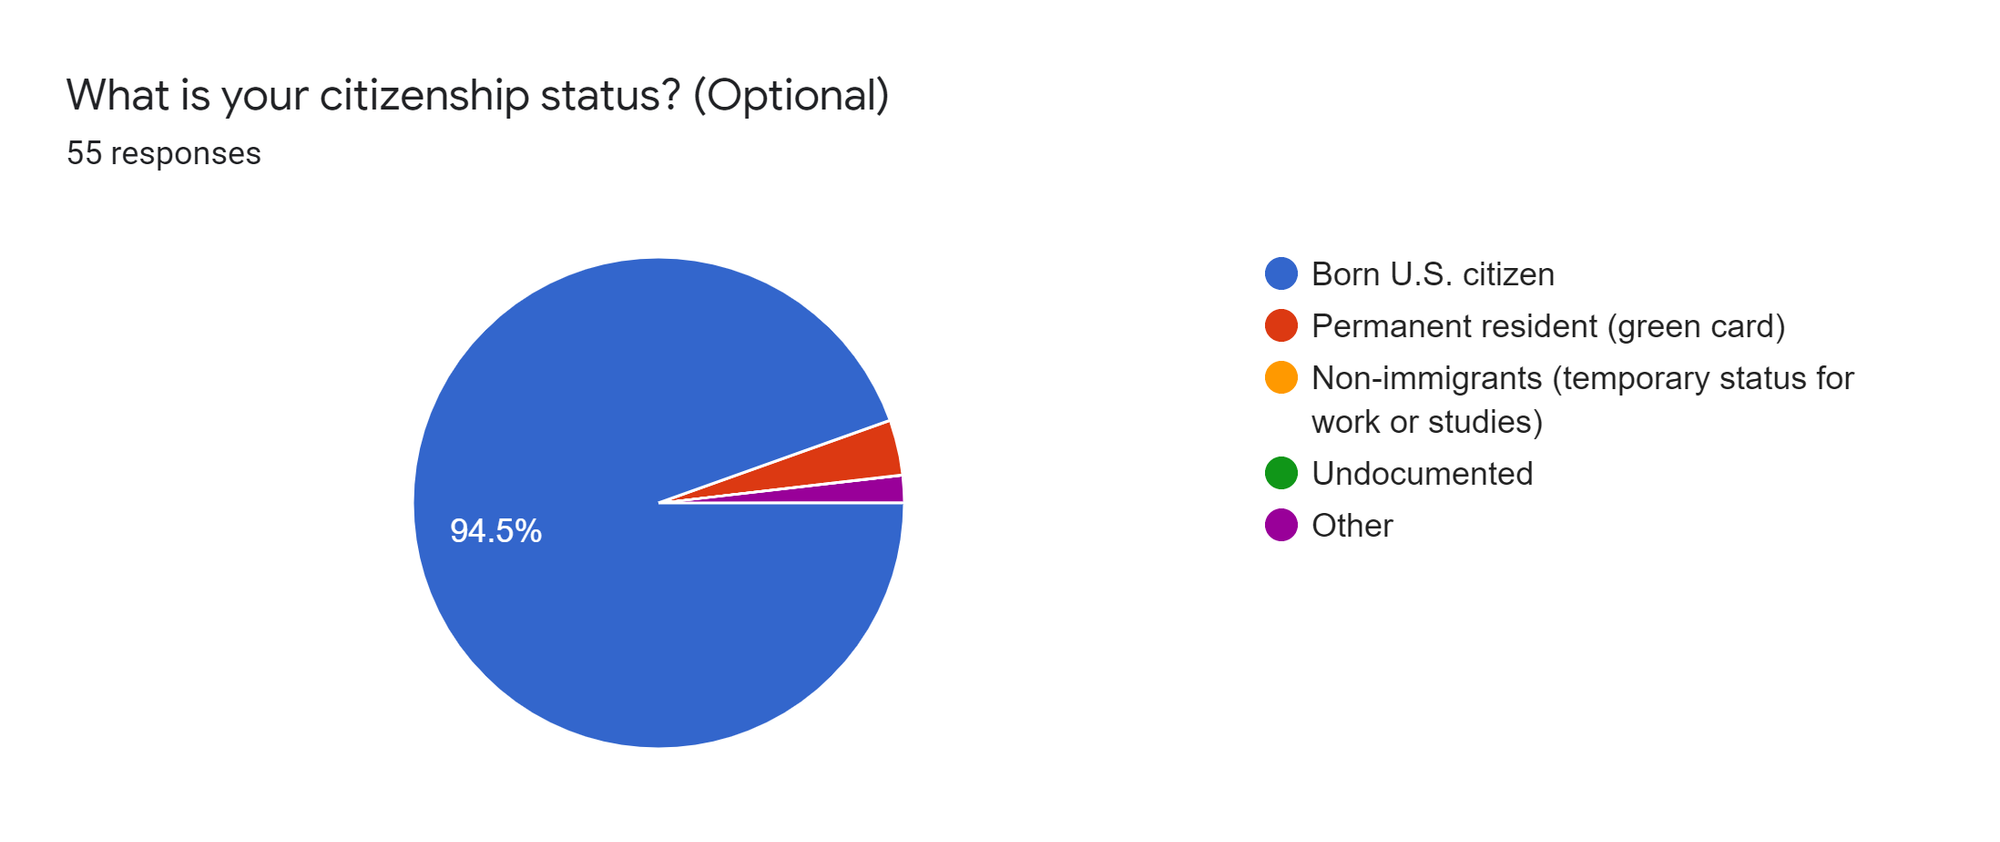 Forms response chart. Question title: What is your citizenship status? (Optional). Number of responses: 55 responses.